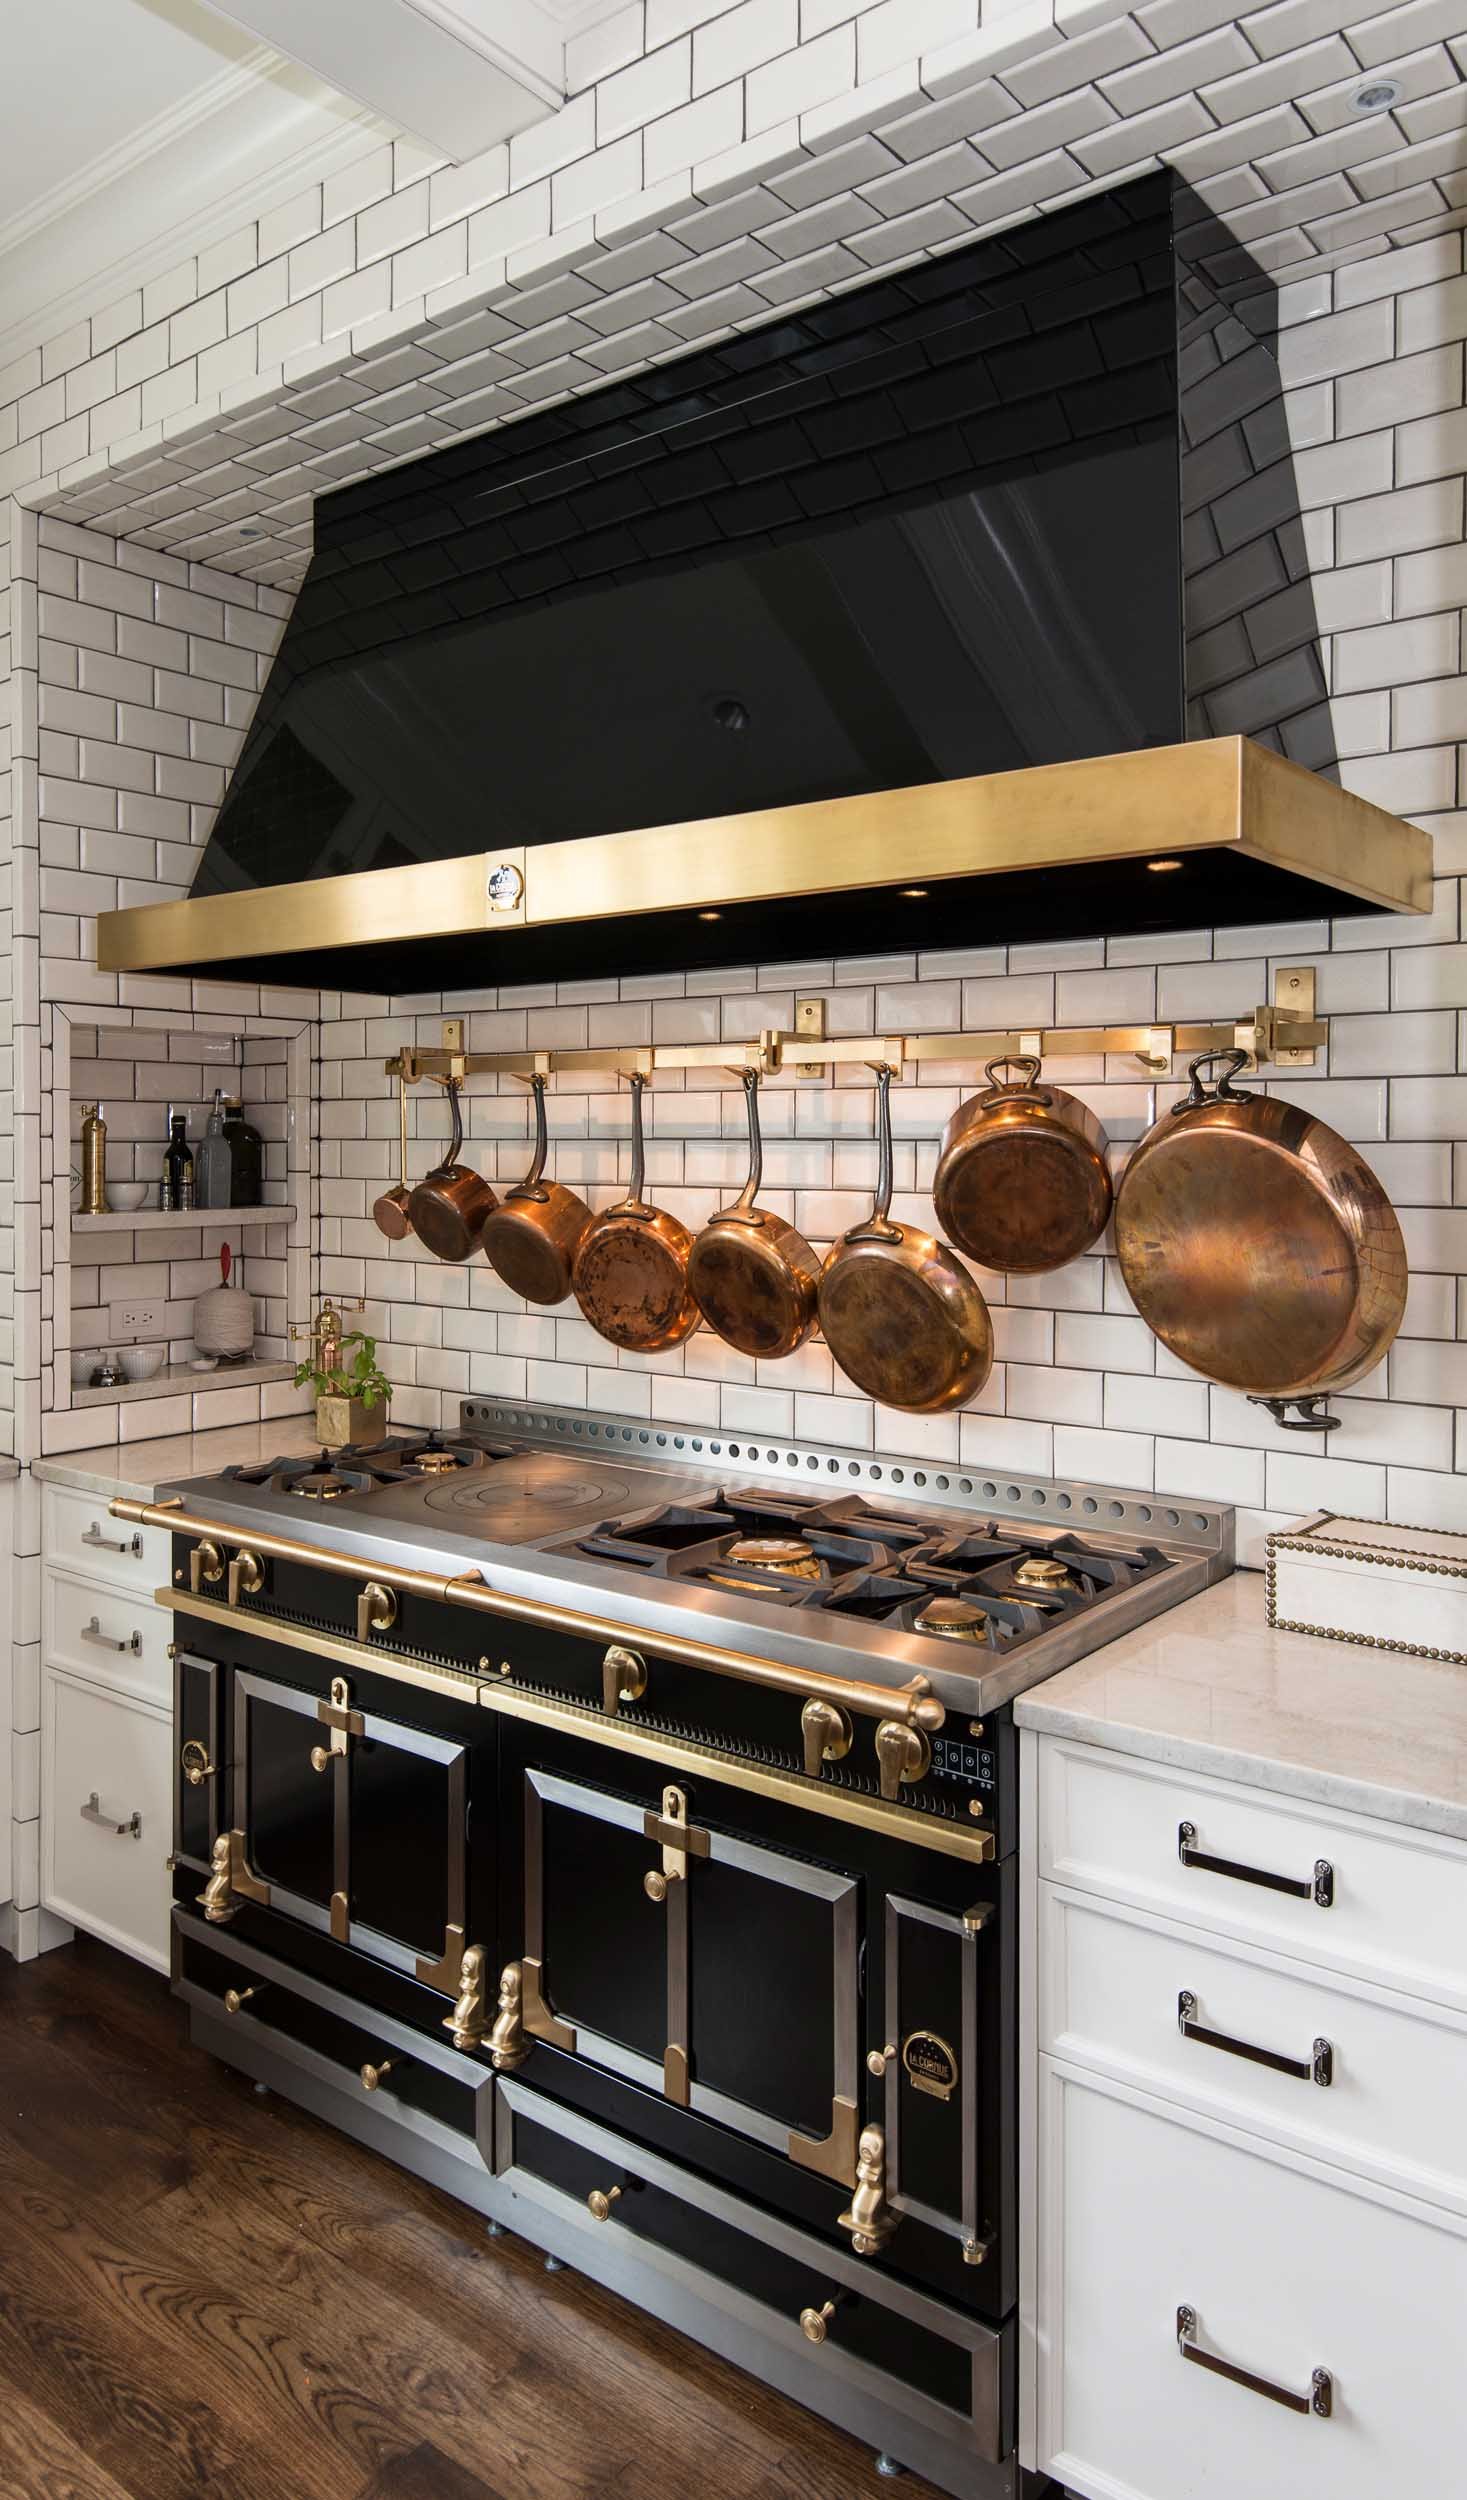 View of copper pots and pans hanging over a high-end range with brass fixtures